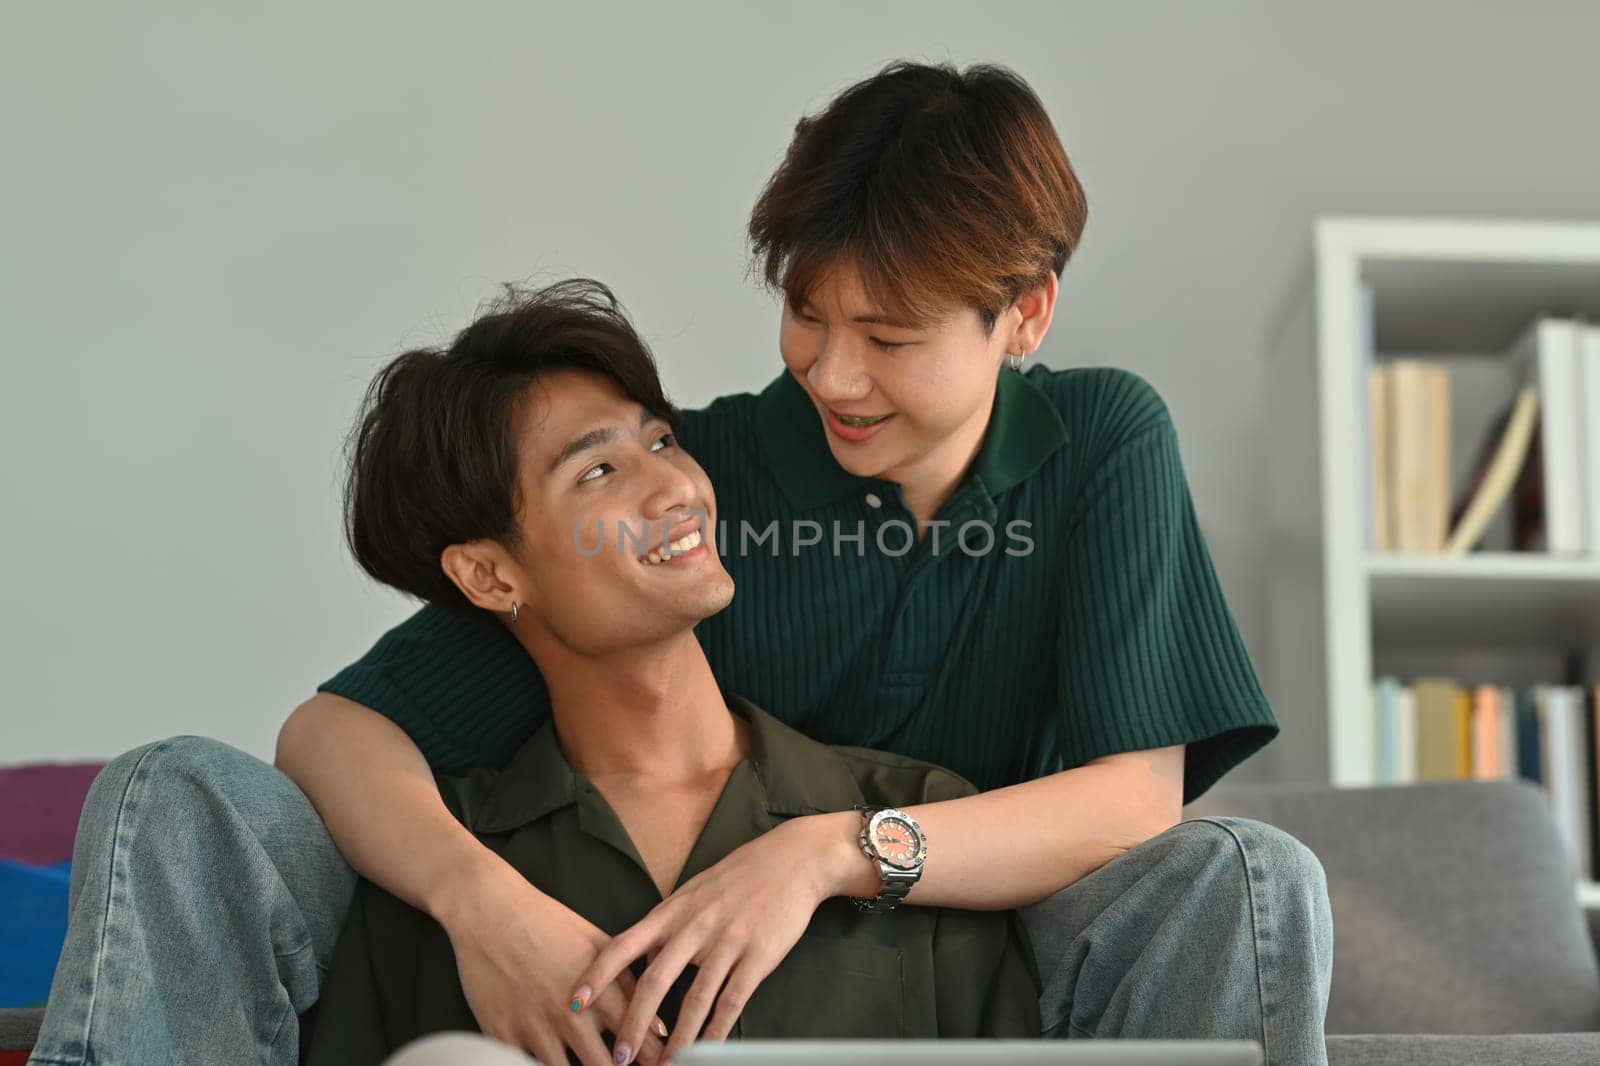 Affectionate moment of gay couple while embracing and looking to each other. LGBT, love and lifestyle relationship concept by prathanchorruangsak